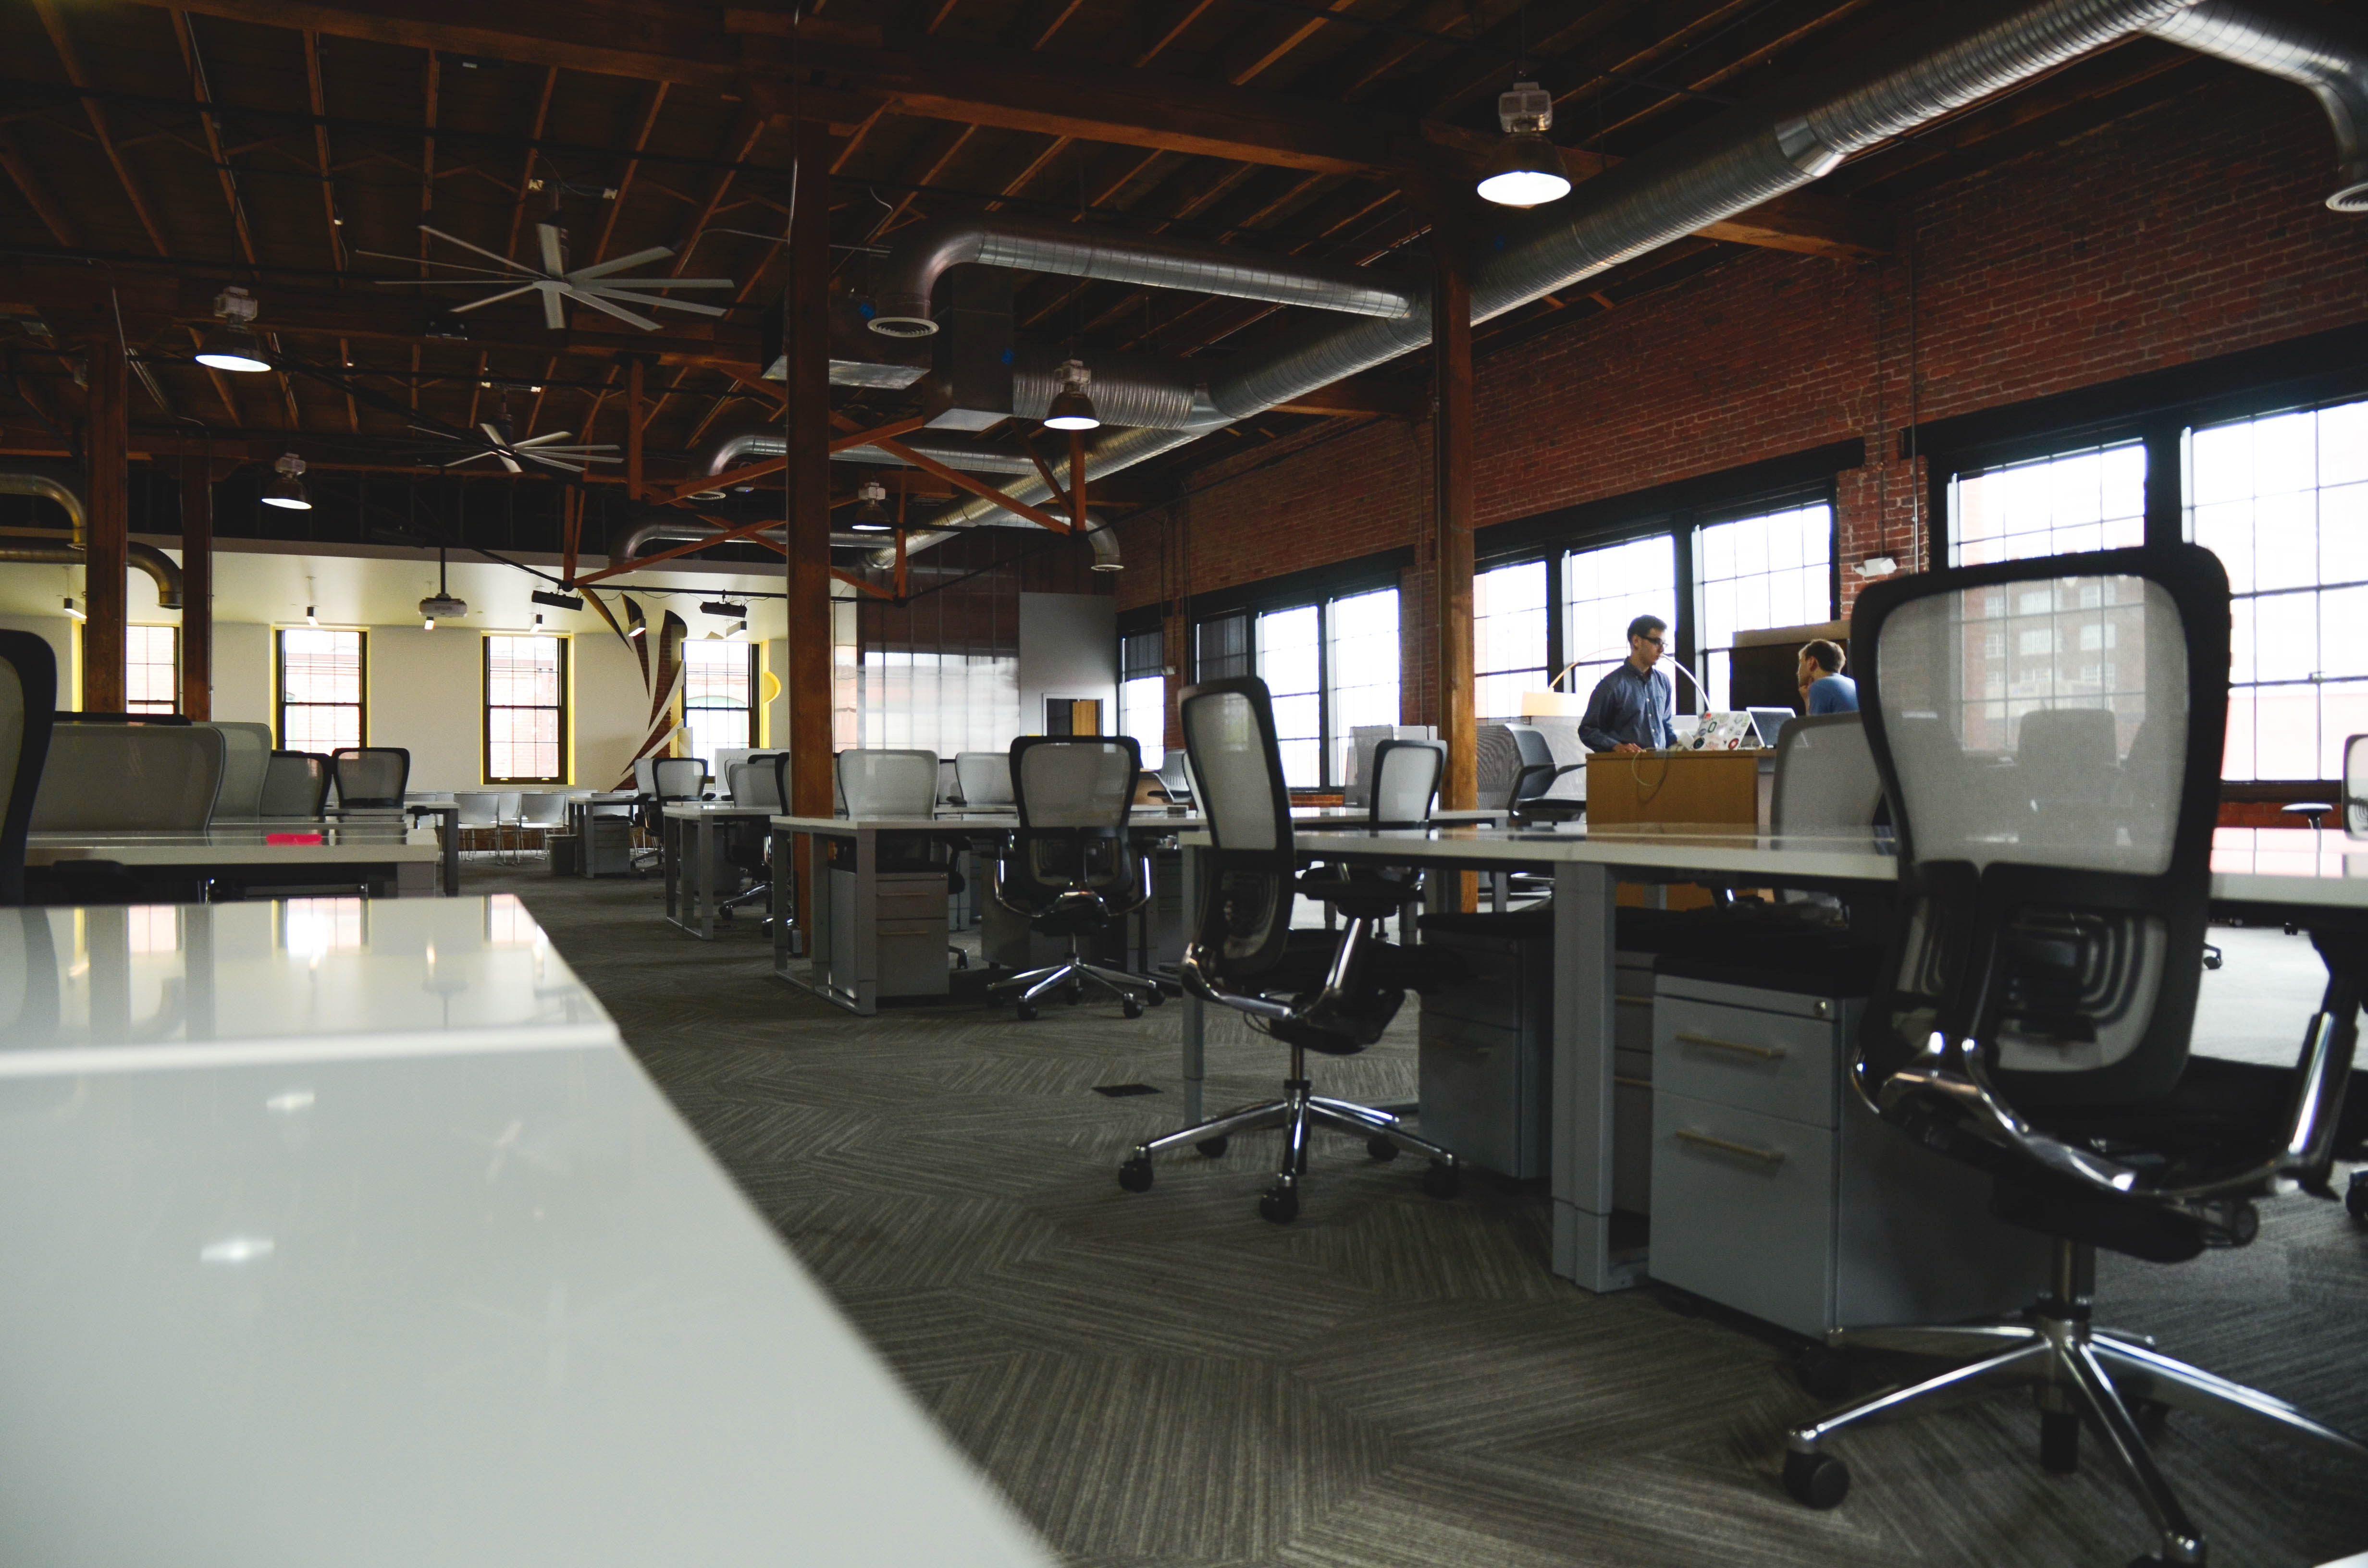 Virtual office vs coworking space. Which one is for you?